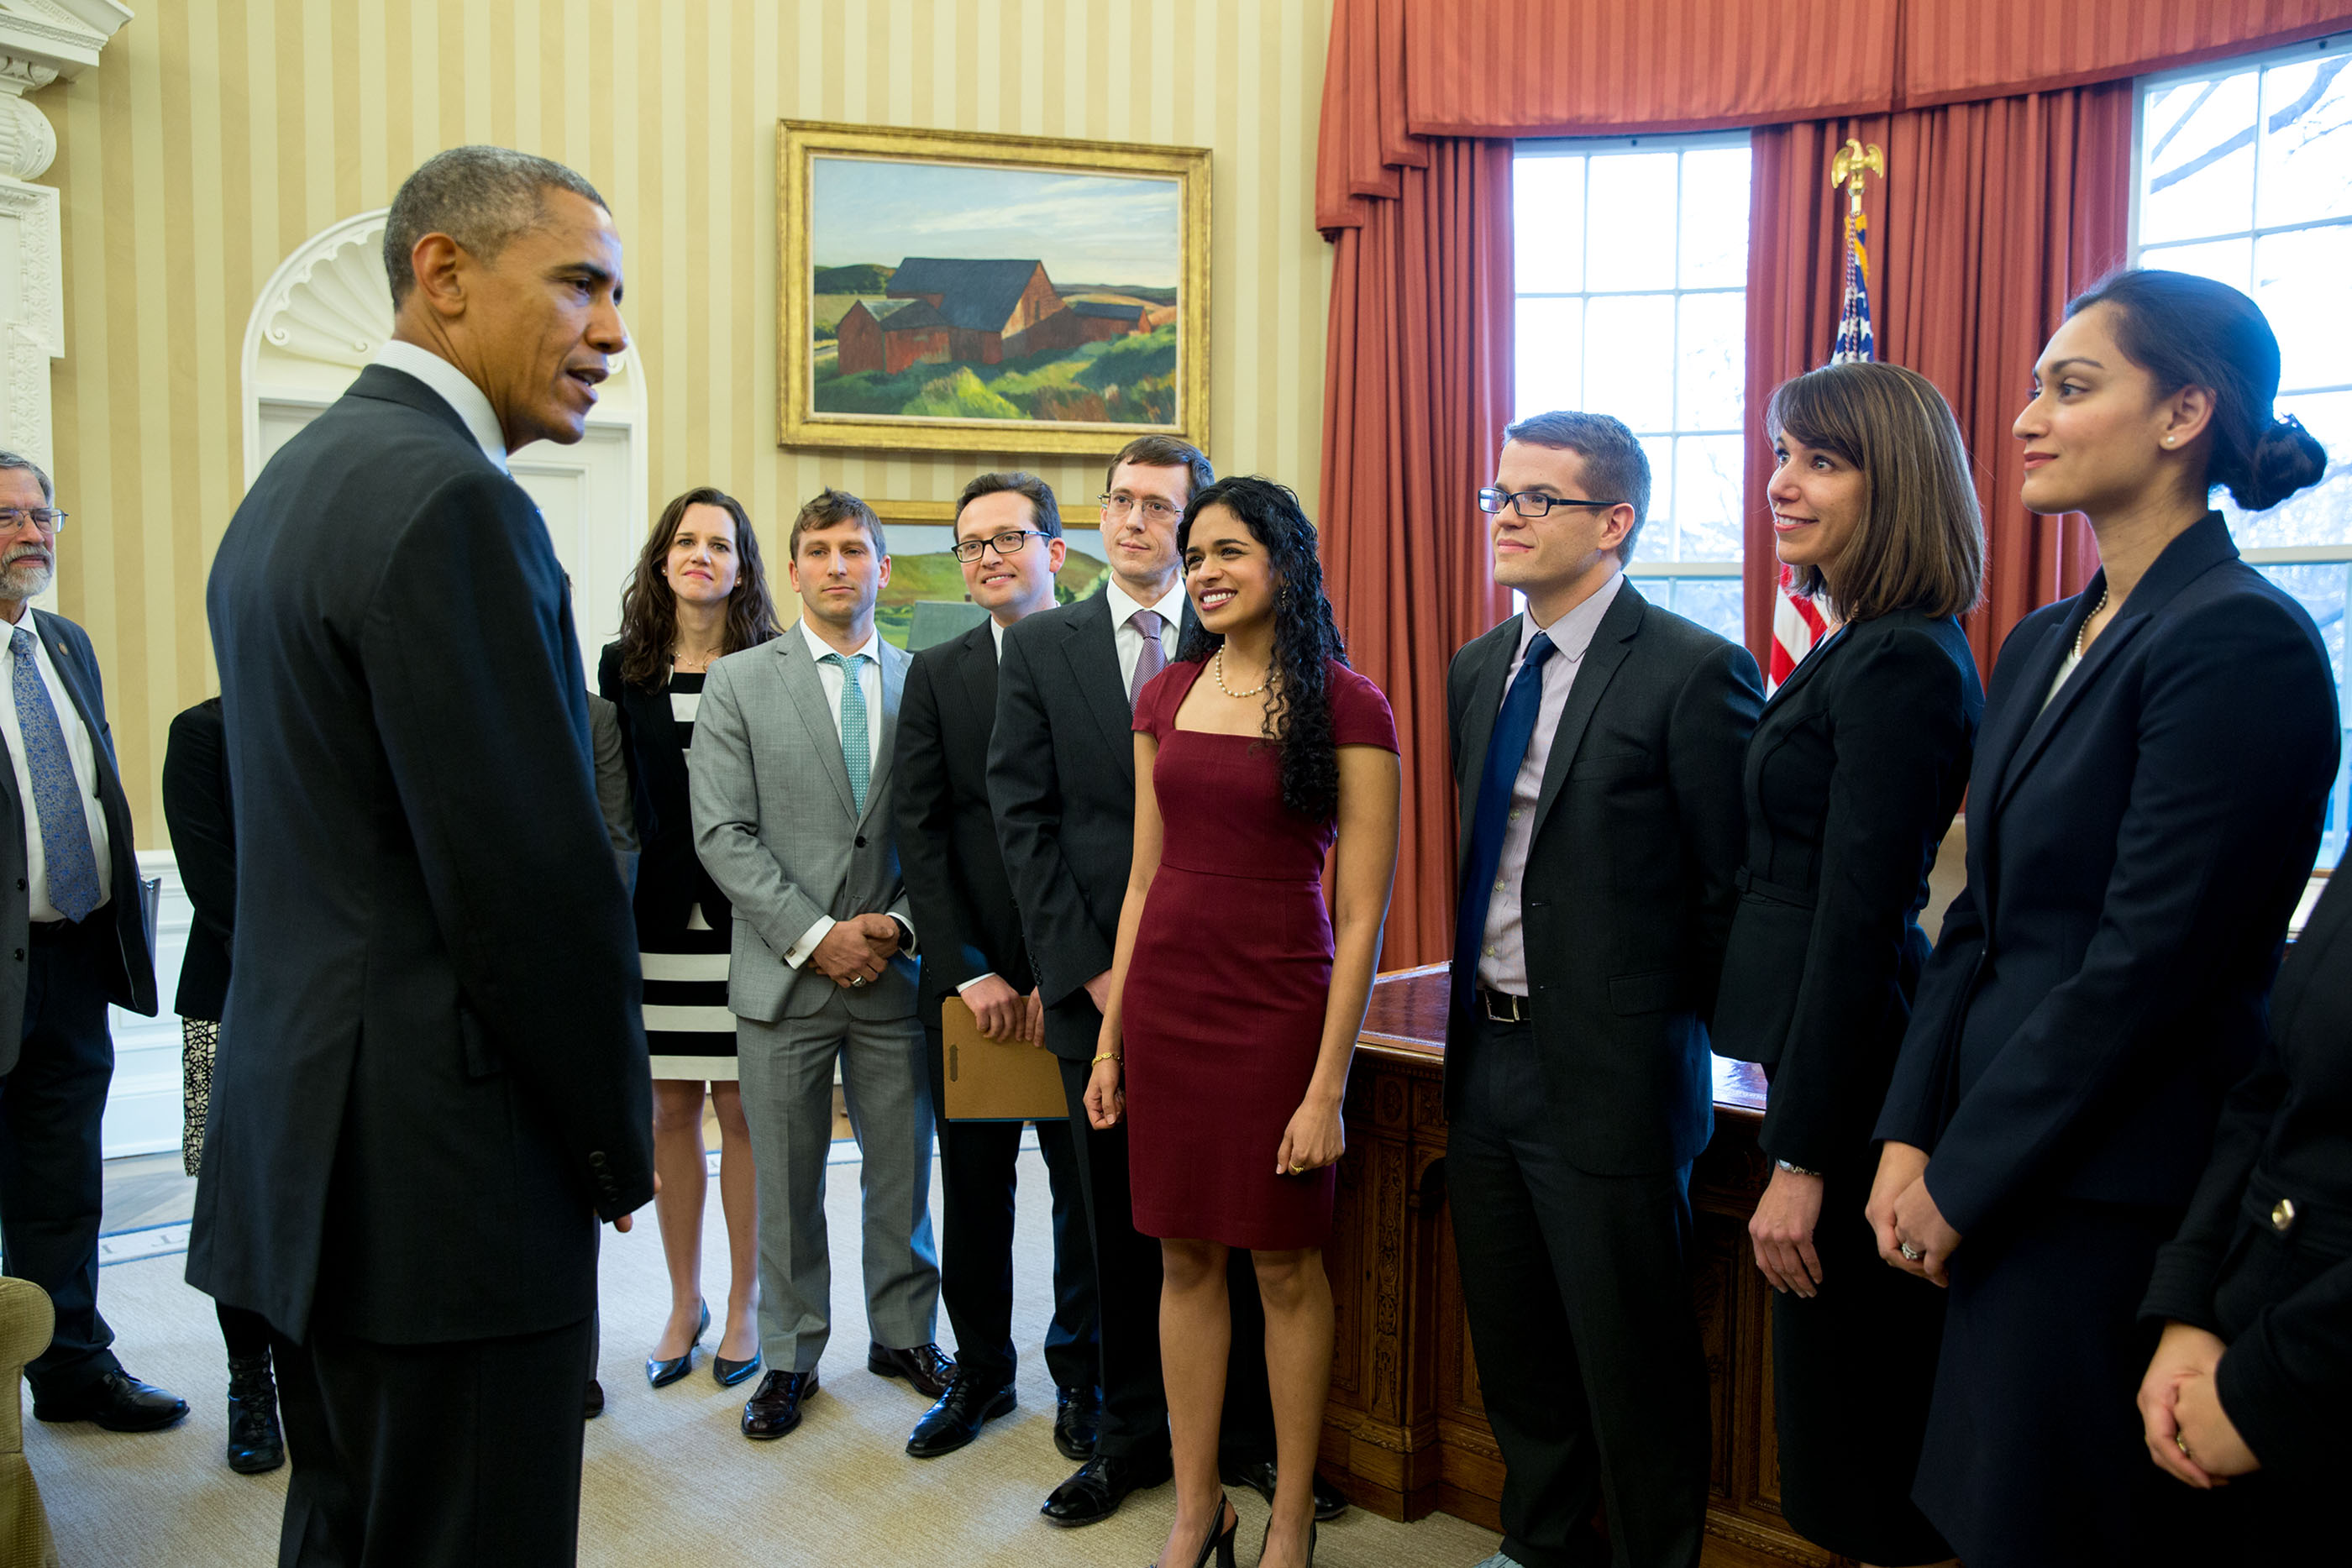 President Barack Obama speaks with members of the Social and Behavioral Sciences Team in the Oval Office in January 2015.